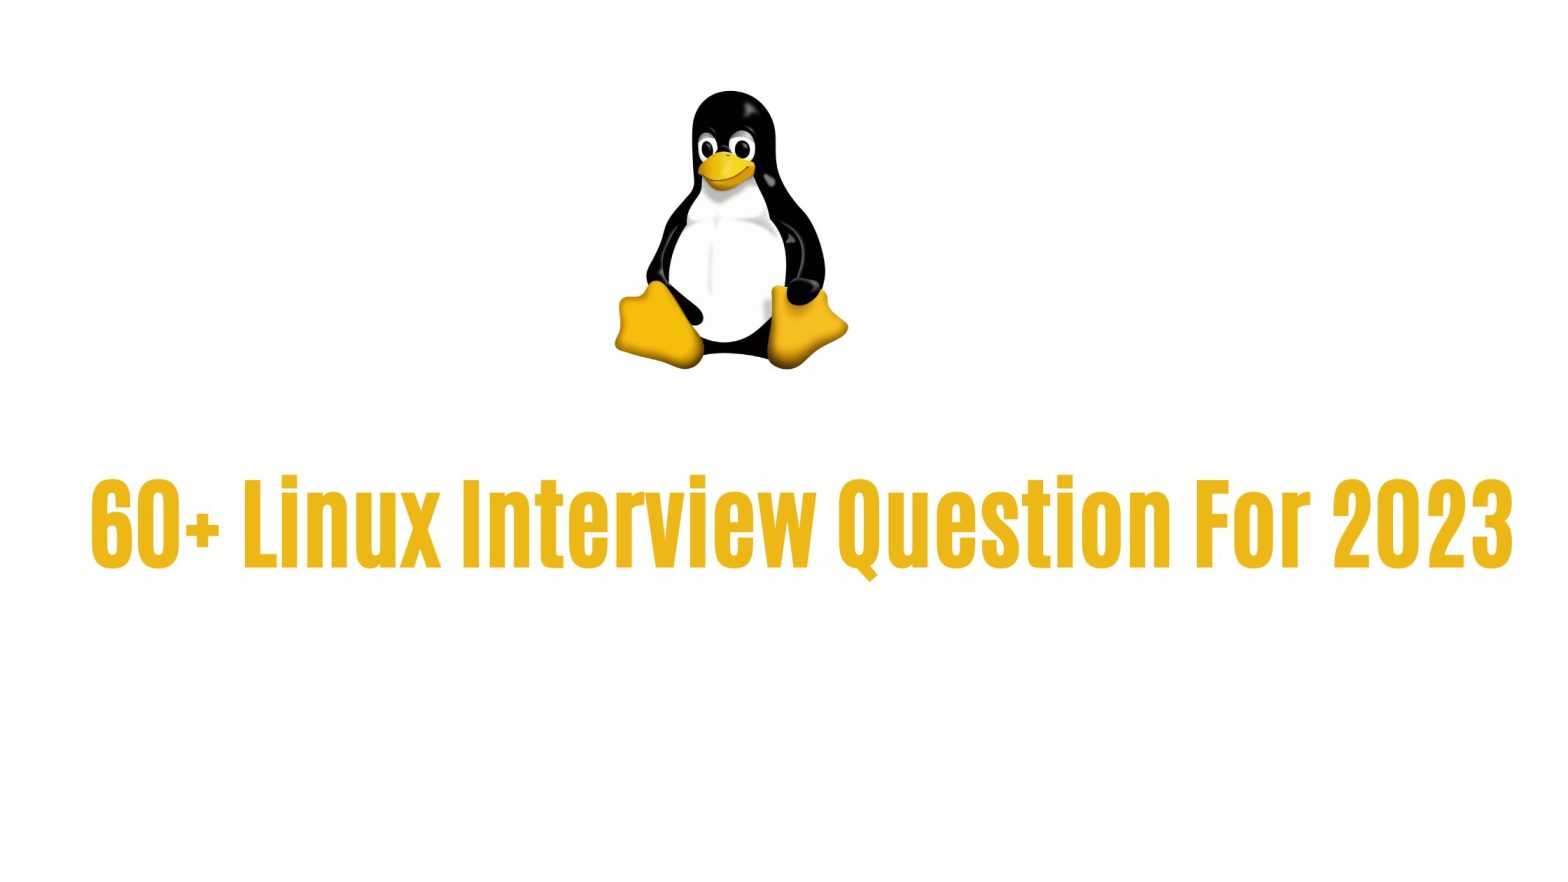 60+ Linux Interview Question For 2023 | Linux Jobs Guide